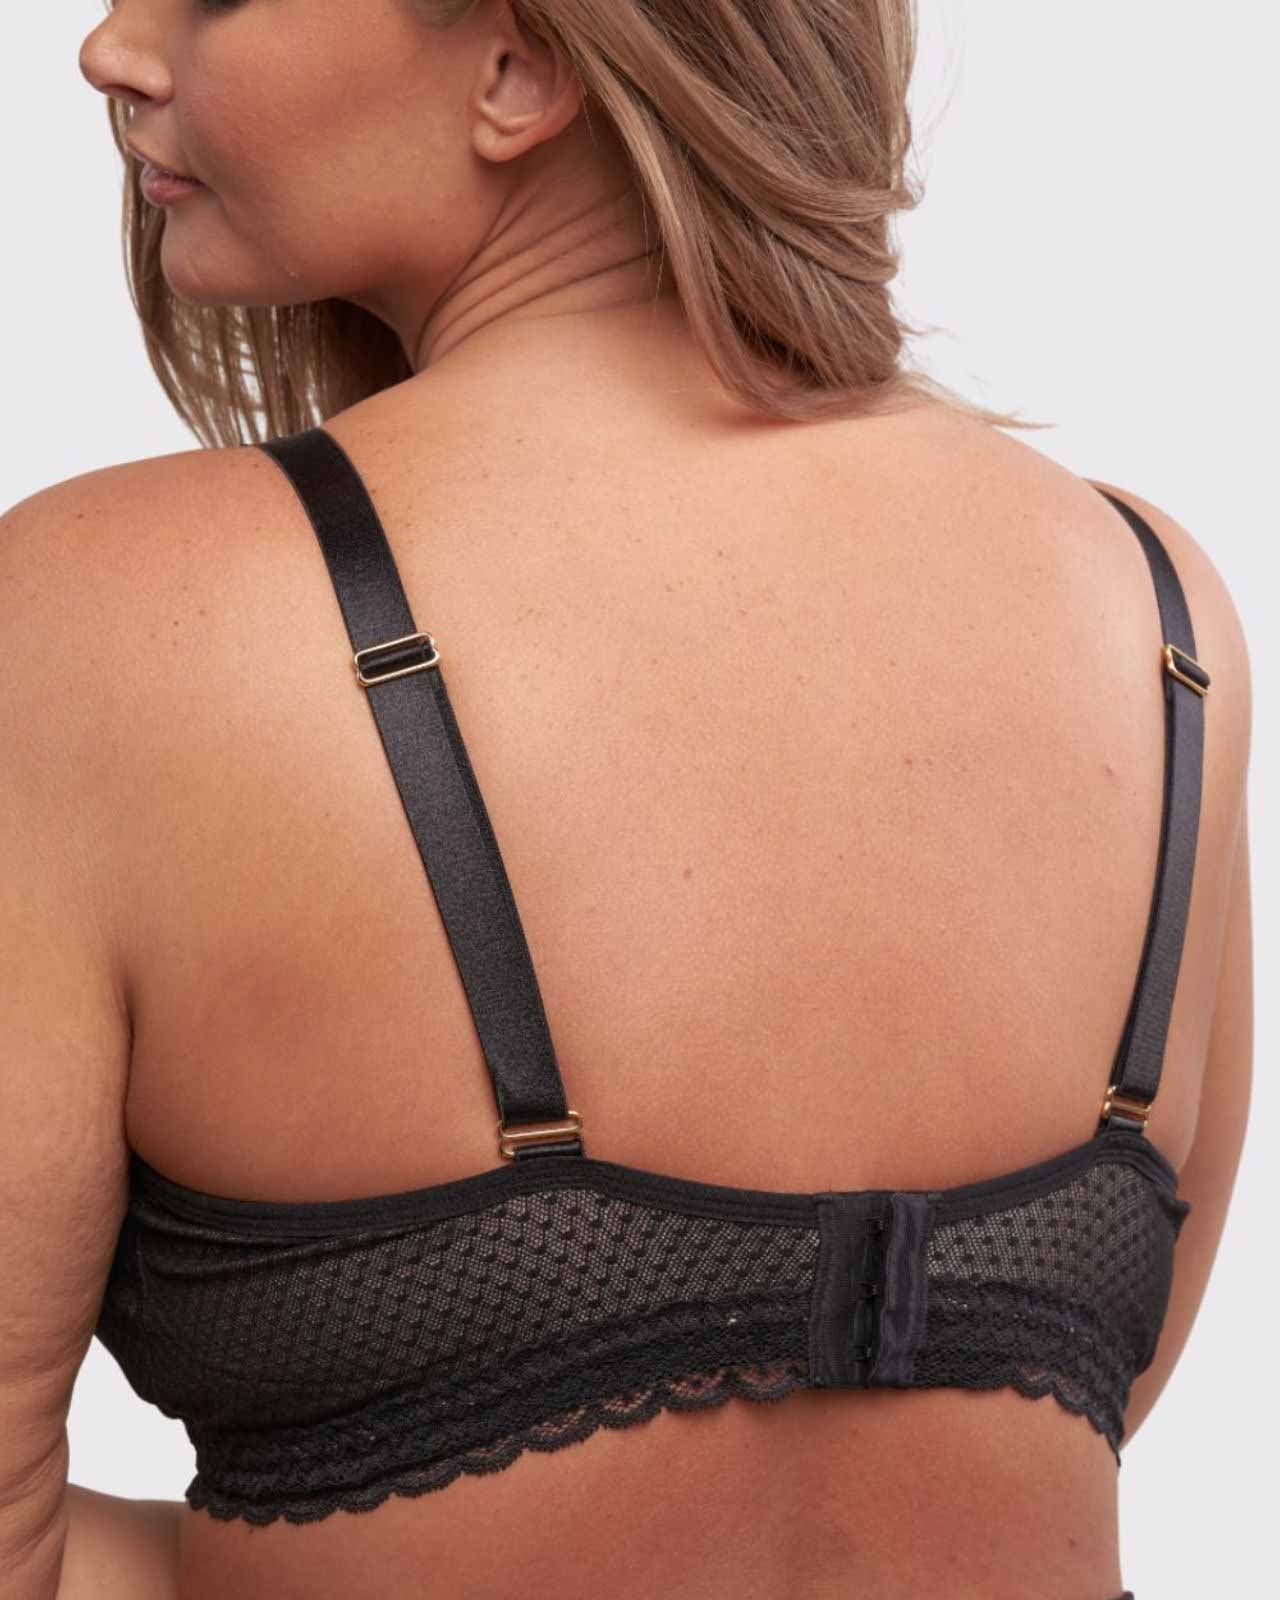 Shop now Bras with Lace Back